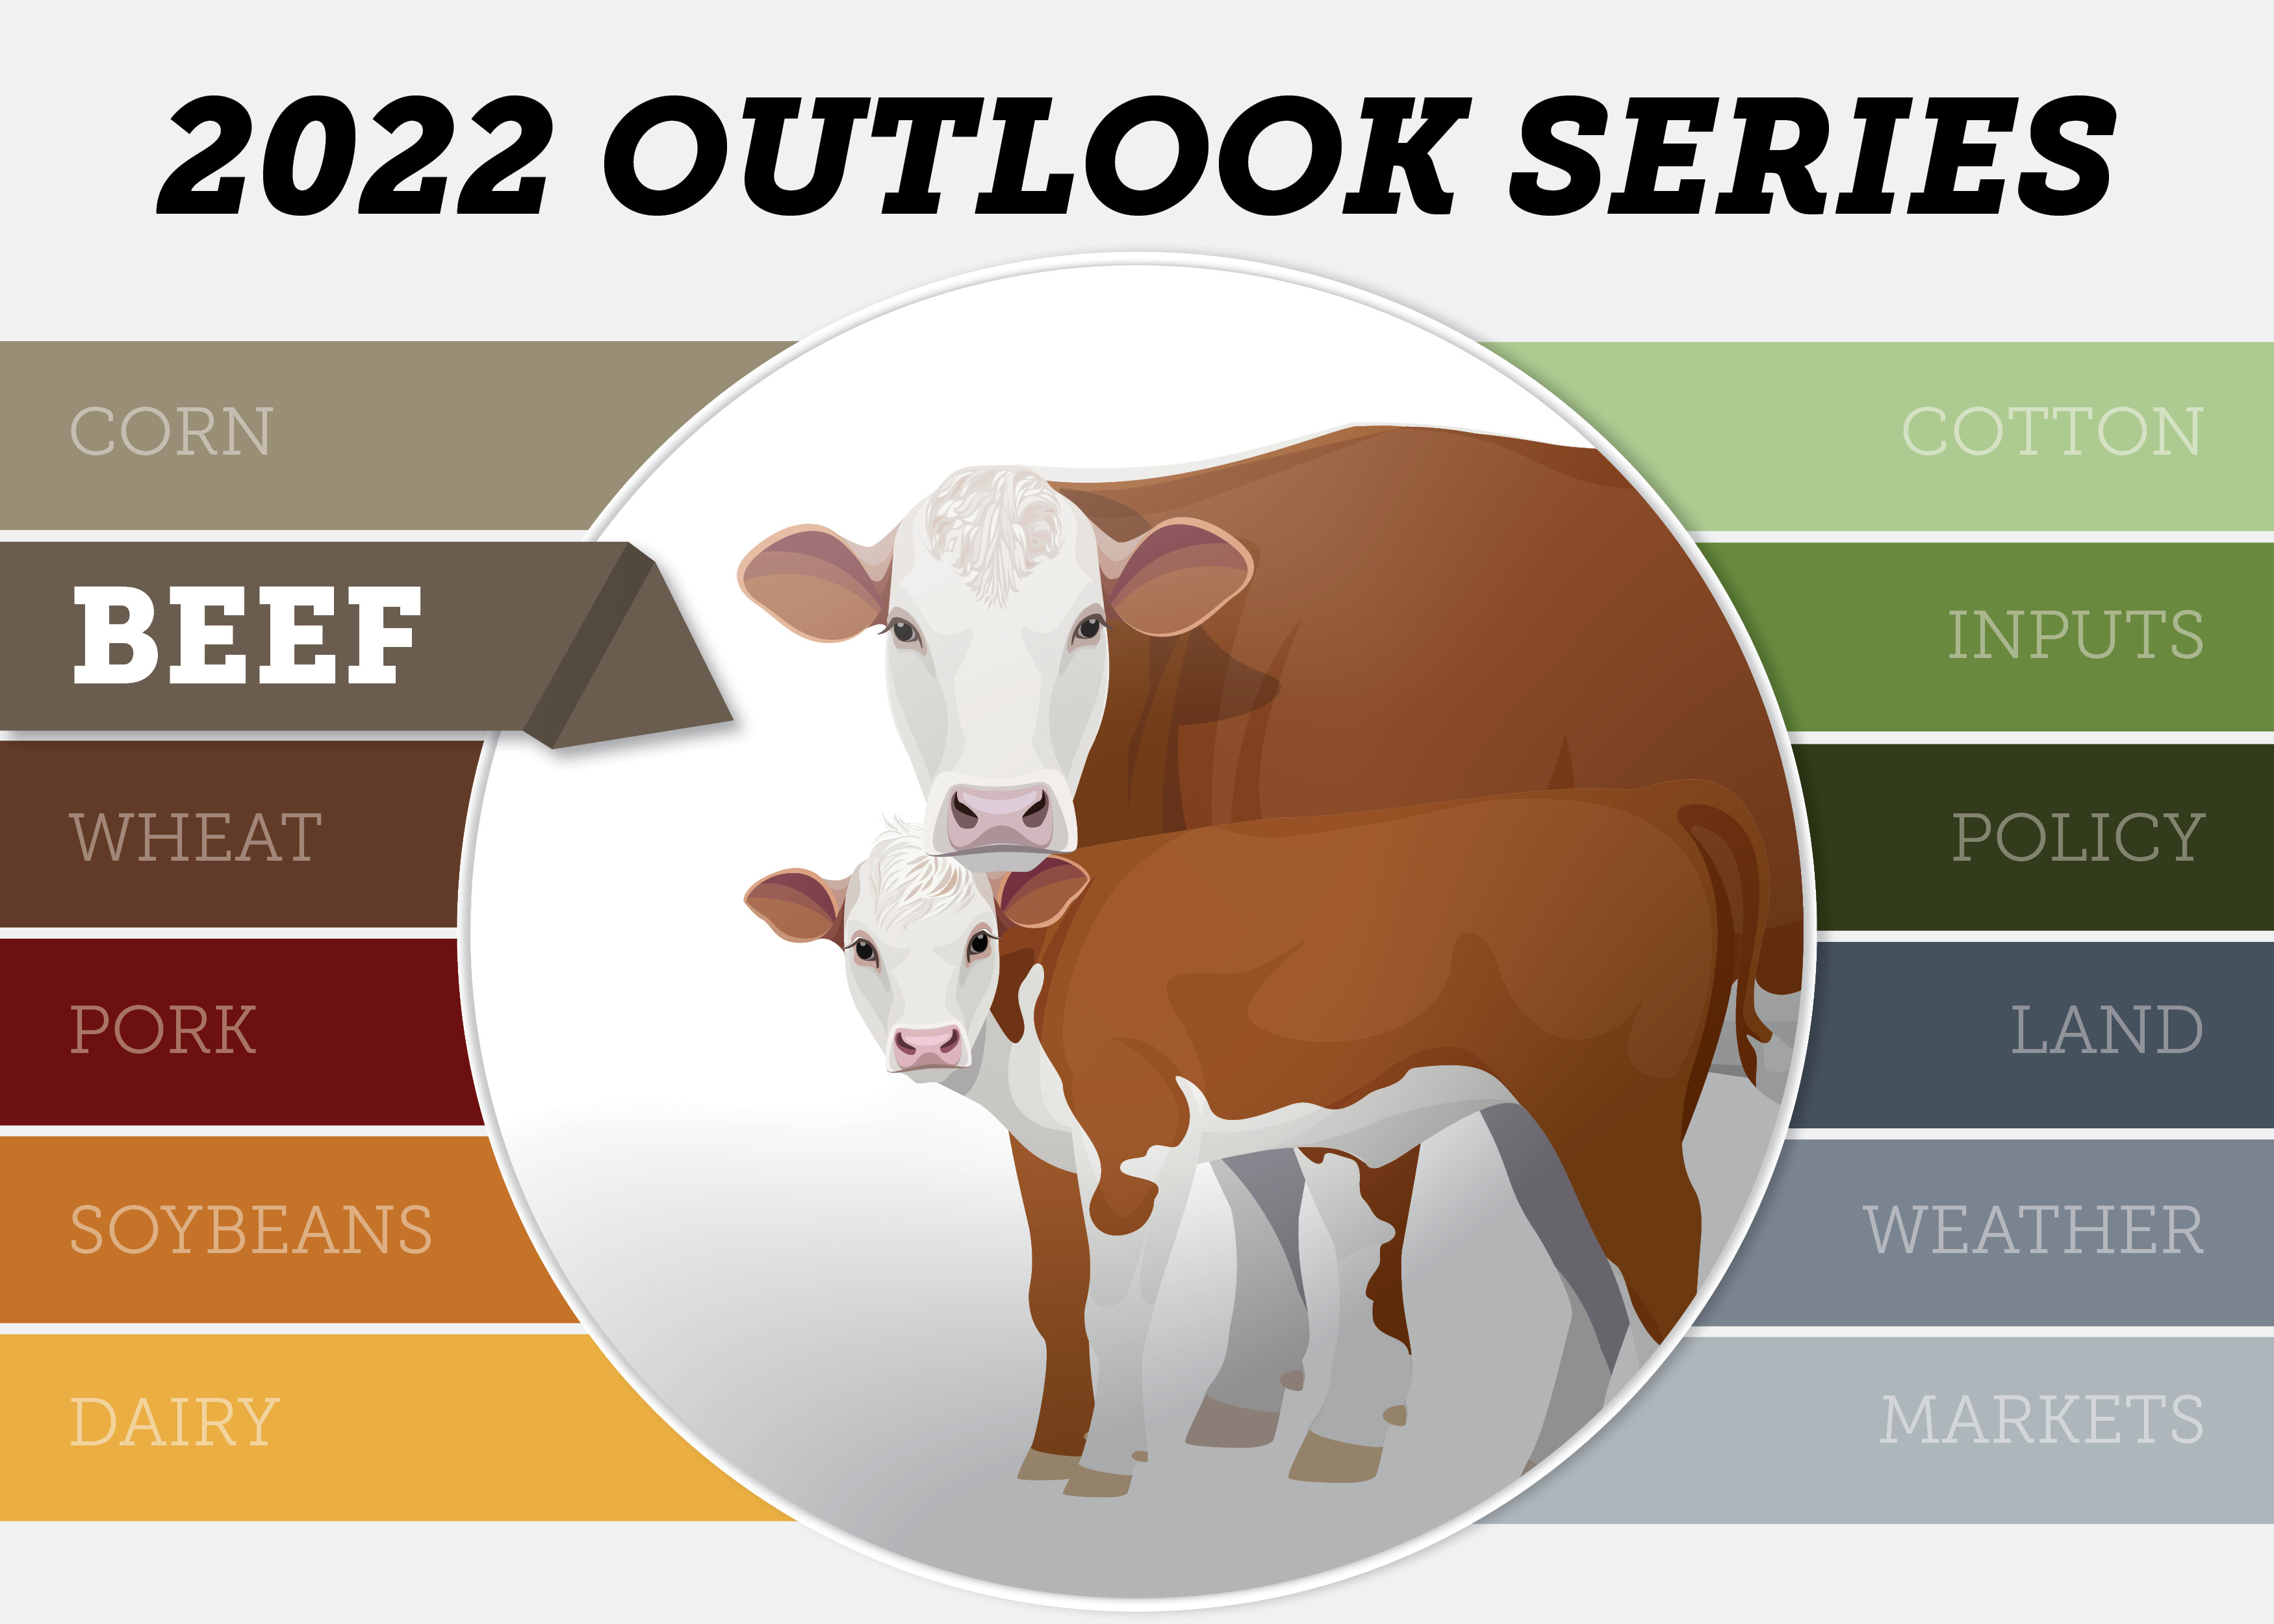 Cattle Outlook Optimistic for 2022 Drovers